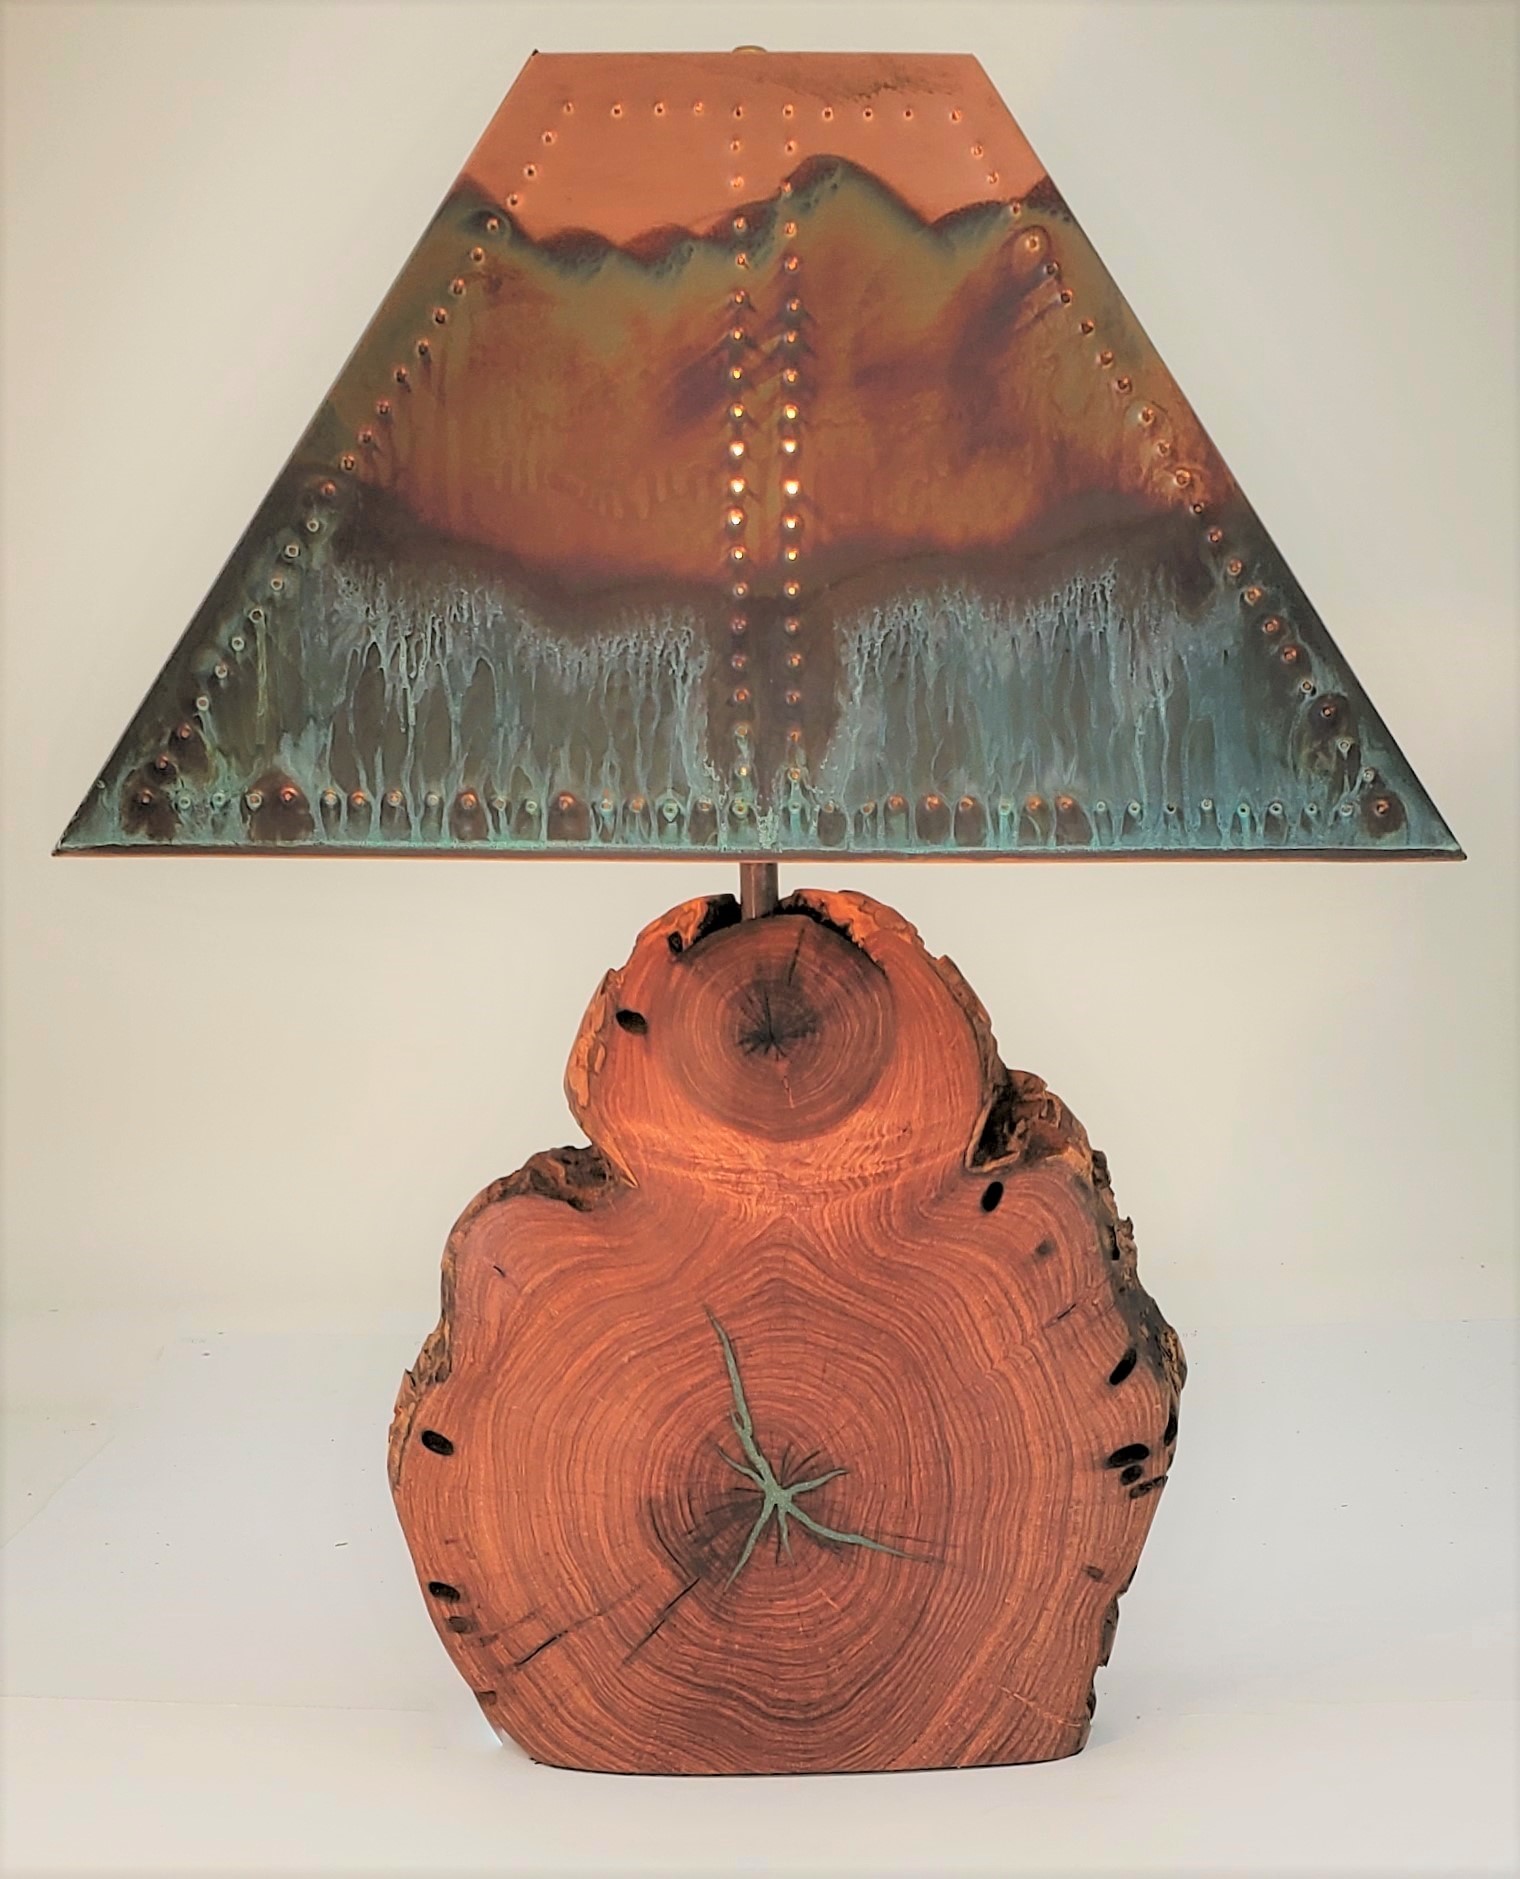 Mesquite Lamp with Turquoise Inlay and Copper Shade (Height: 26.5") #1021